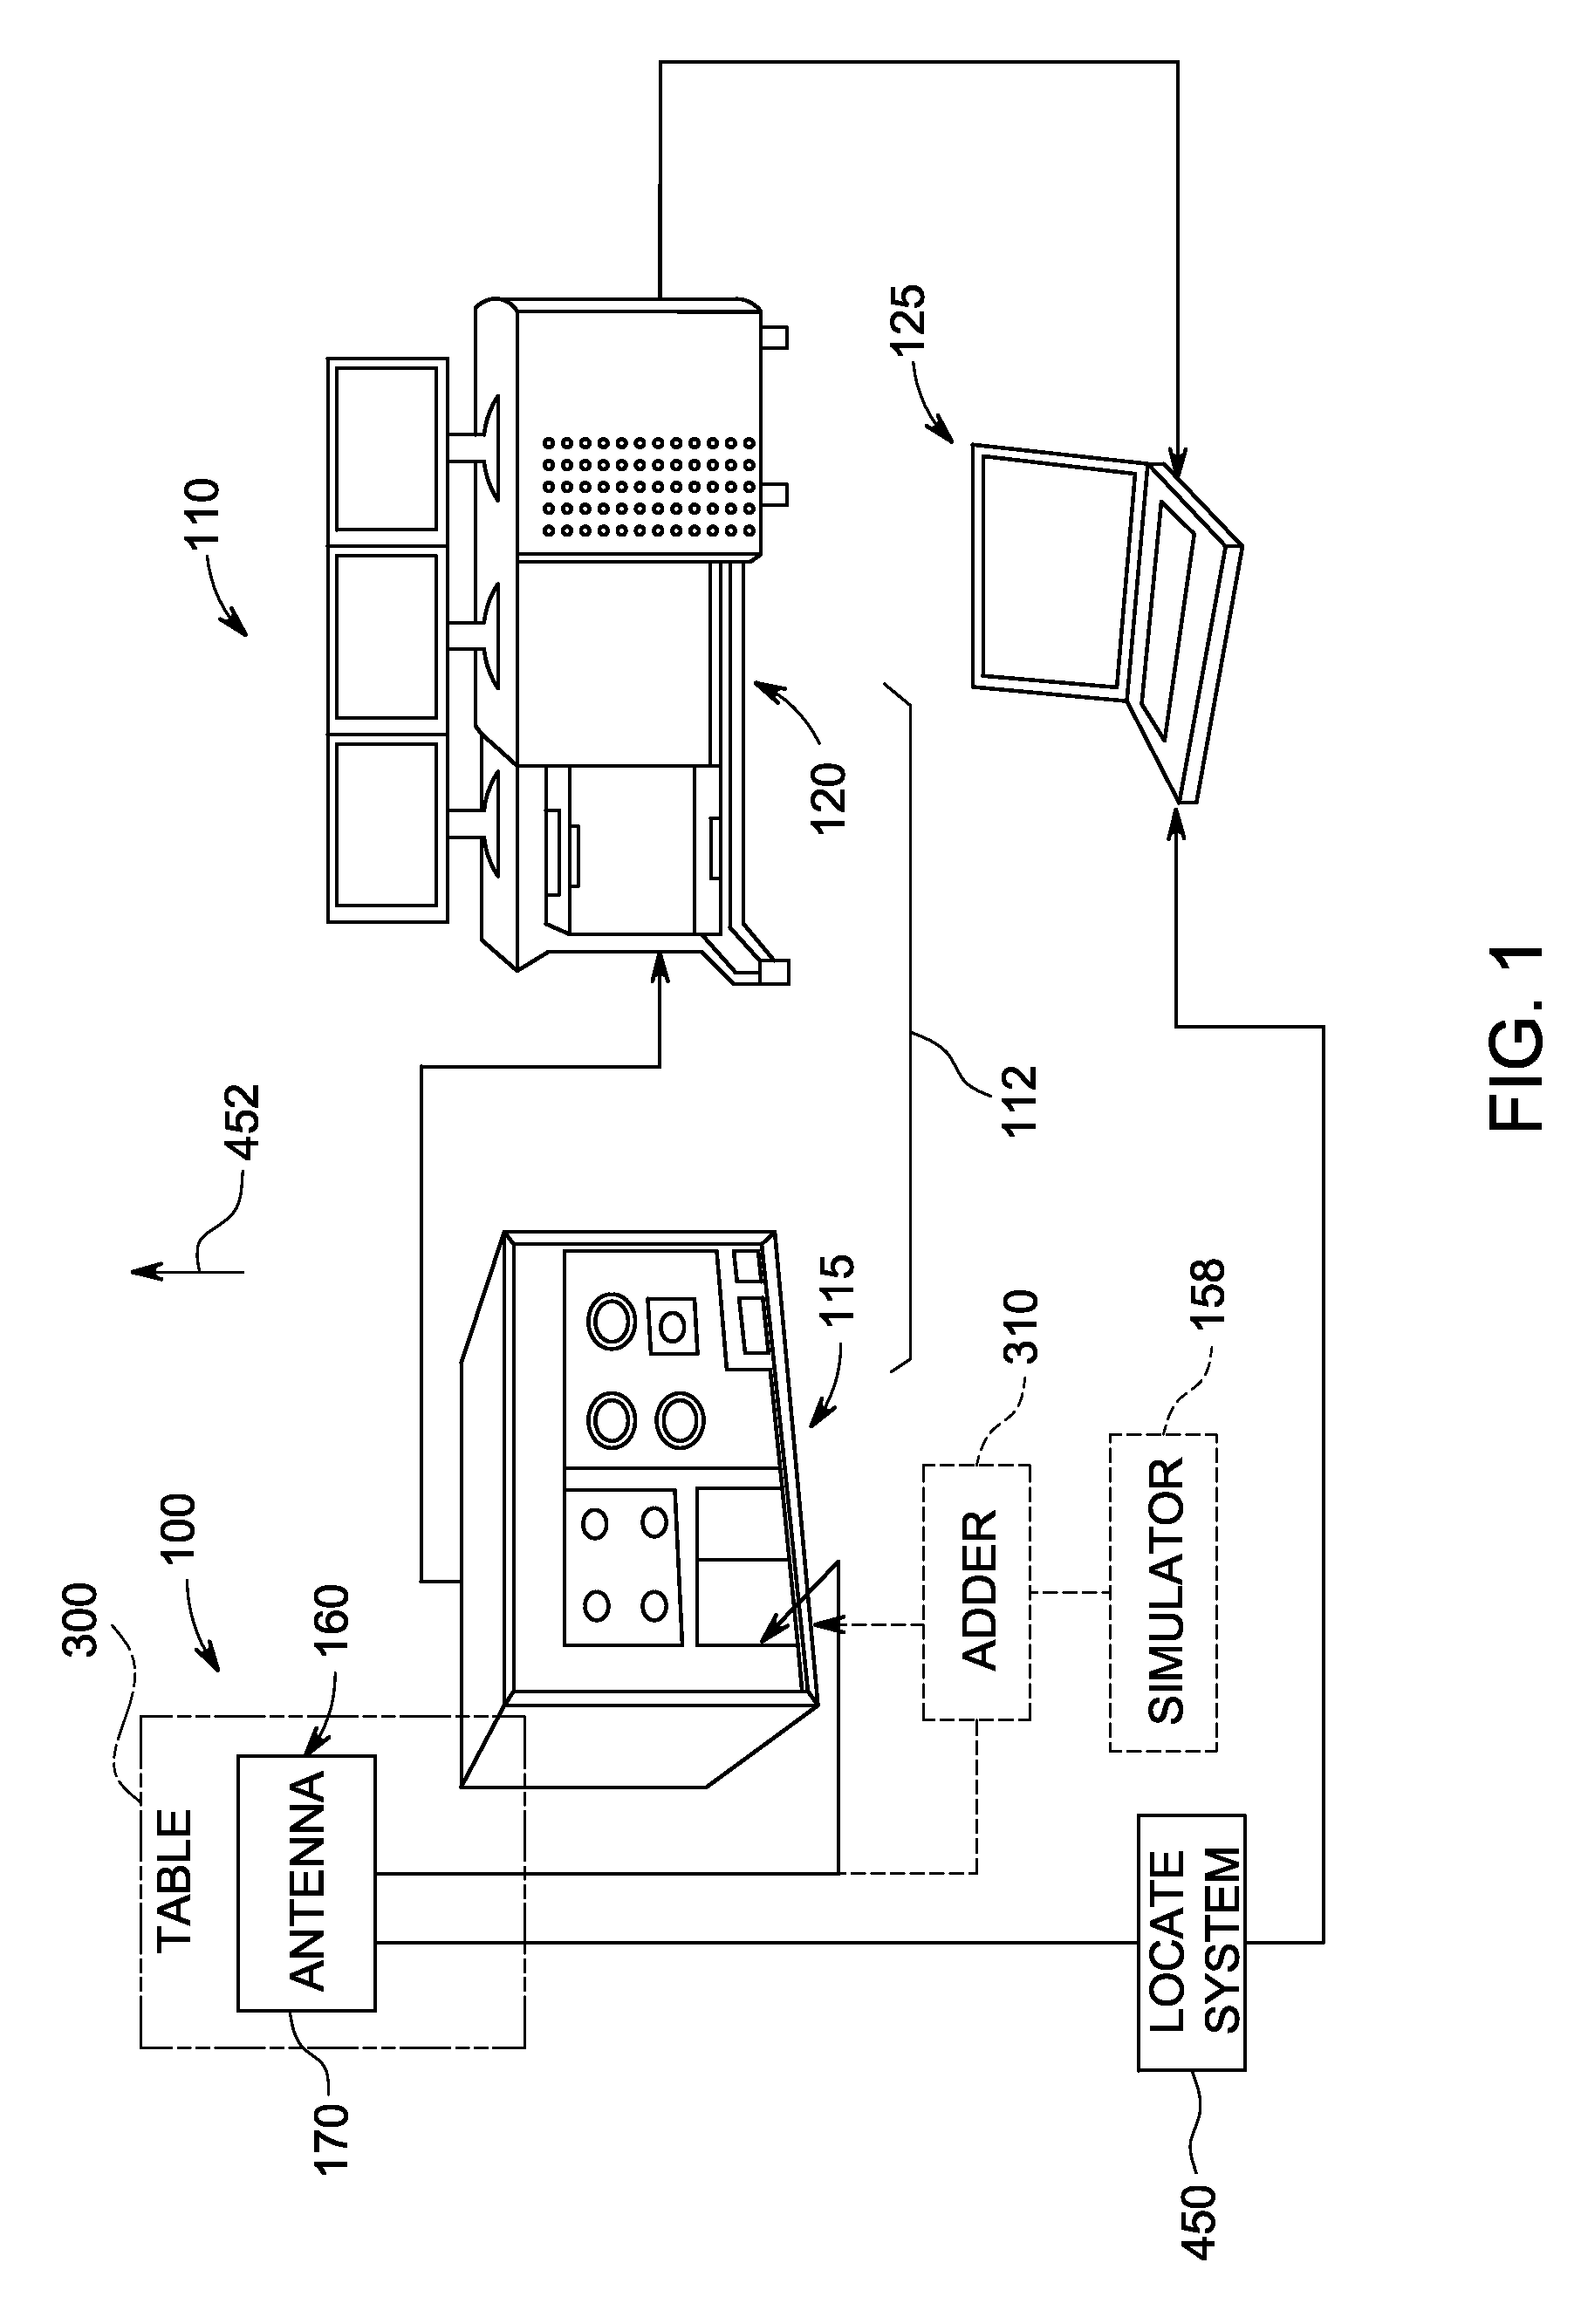 System and method of noise reduction in an electrocardiology study